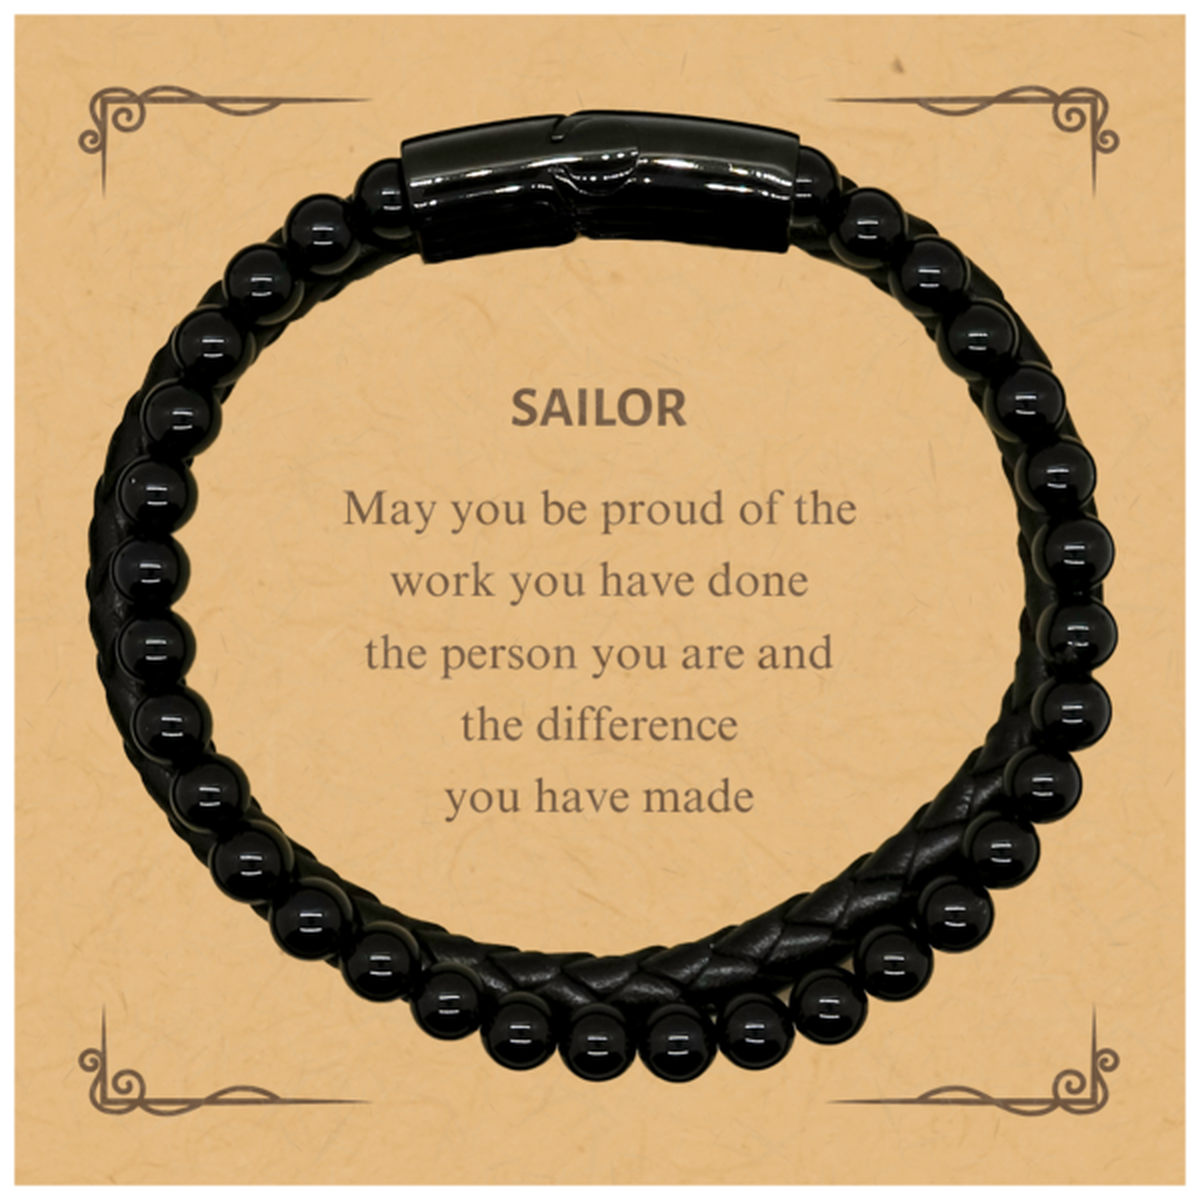 Sailor May you be proud of the work you have done, Retirement Sailor Stone Leather Bracelets for Colleague Appreciation Gifts Amazing for Sailor